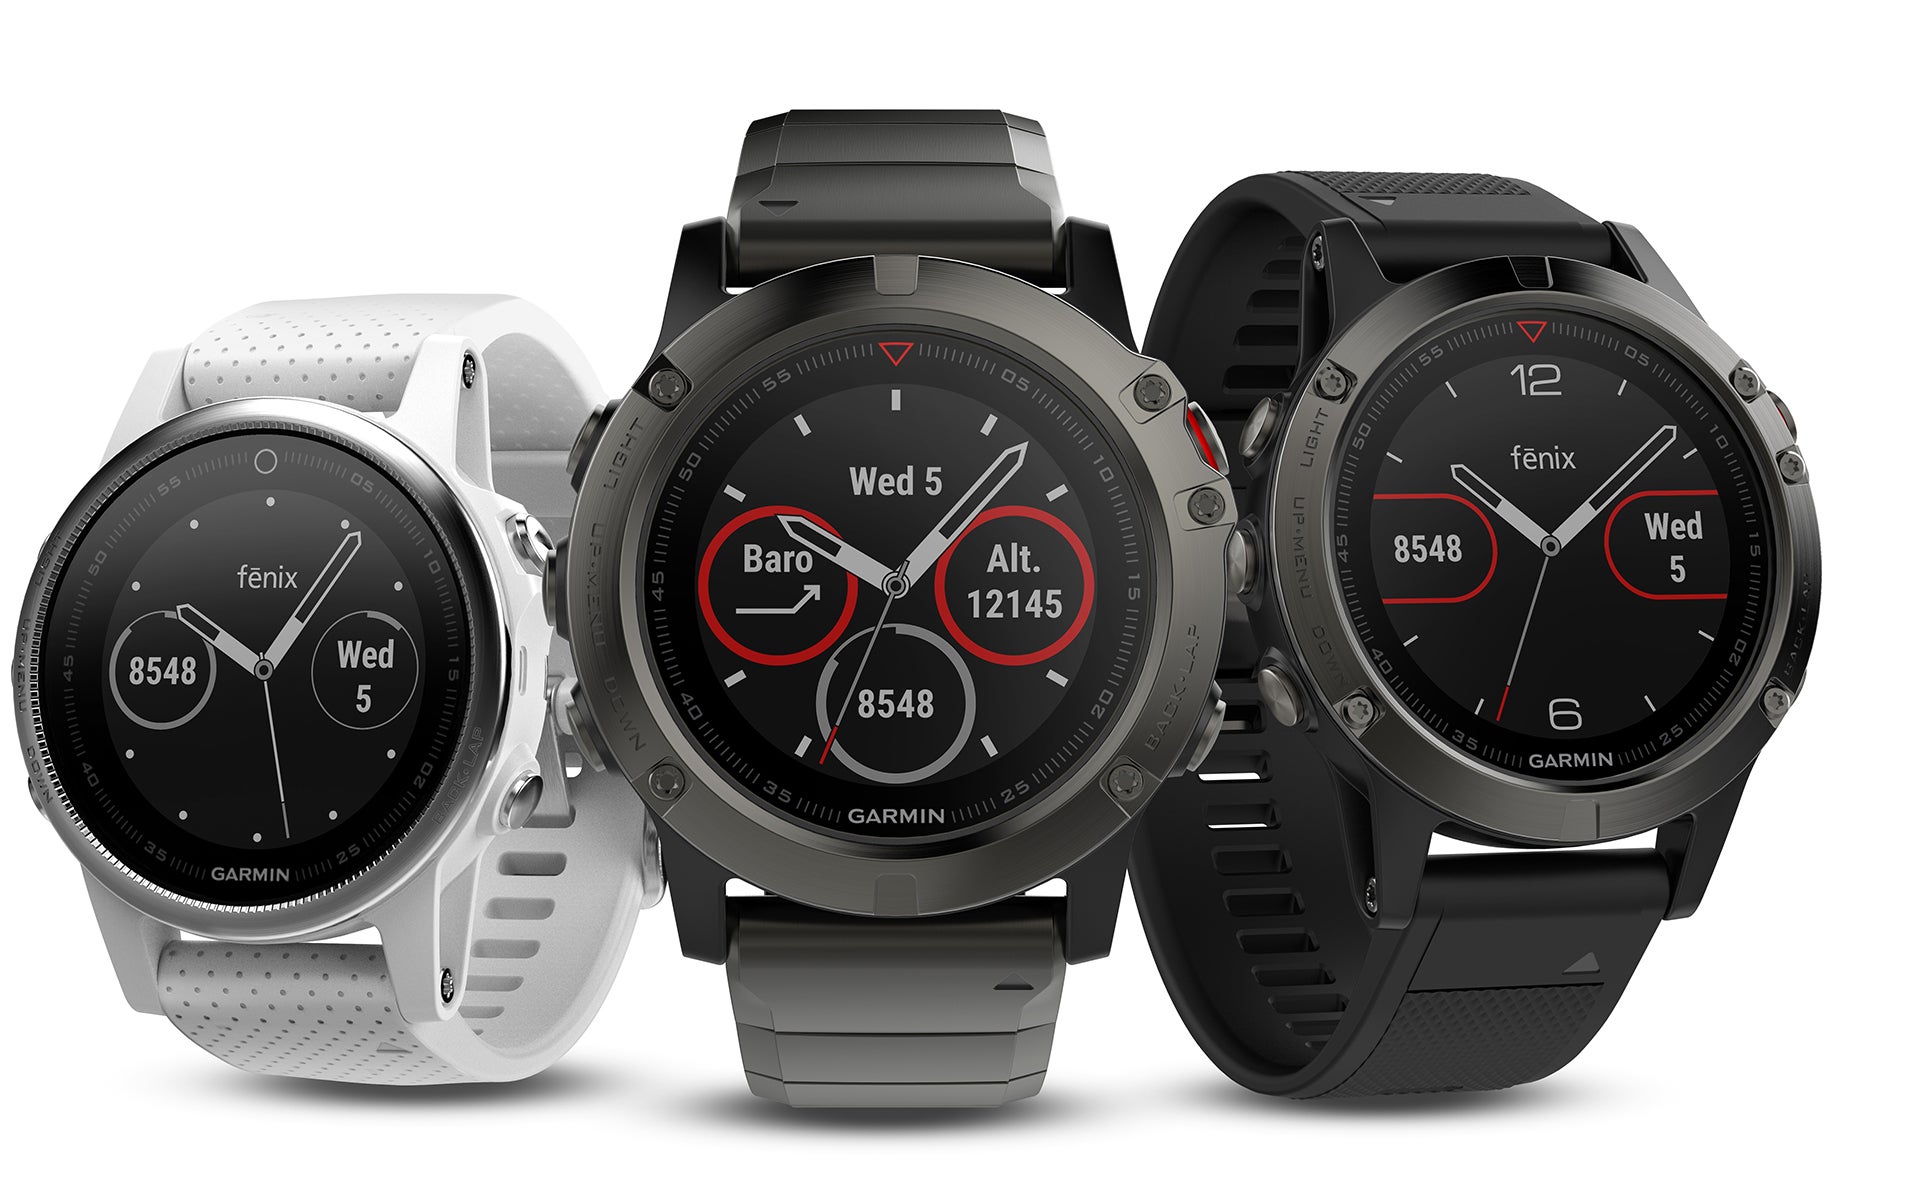 Garmin's new Fenix 5, 5X, and 5S smartwatches are functional and posh with price tags to match